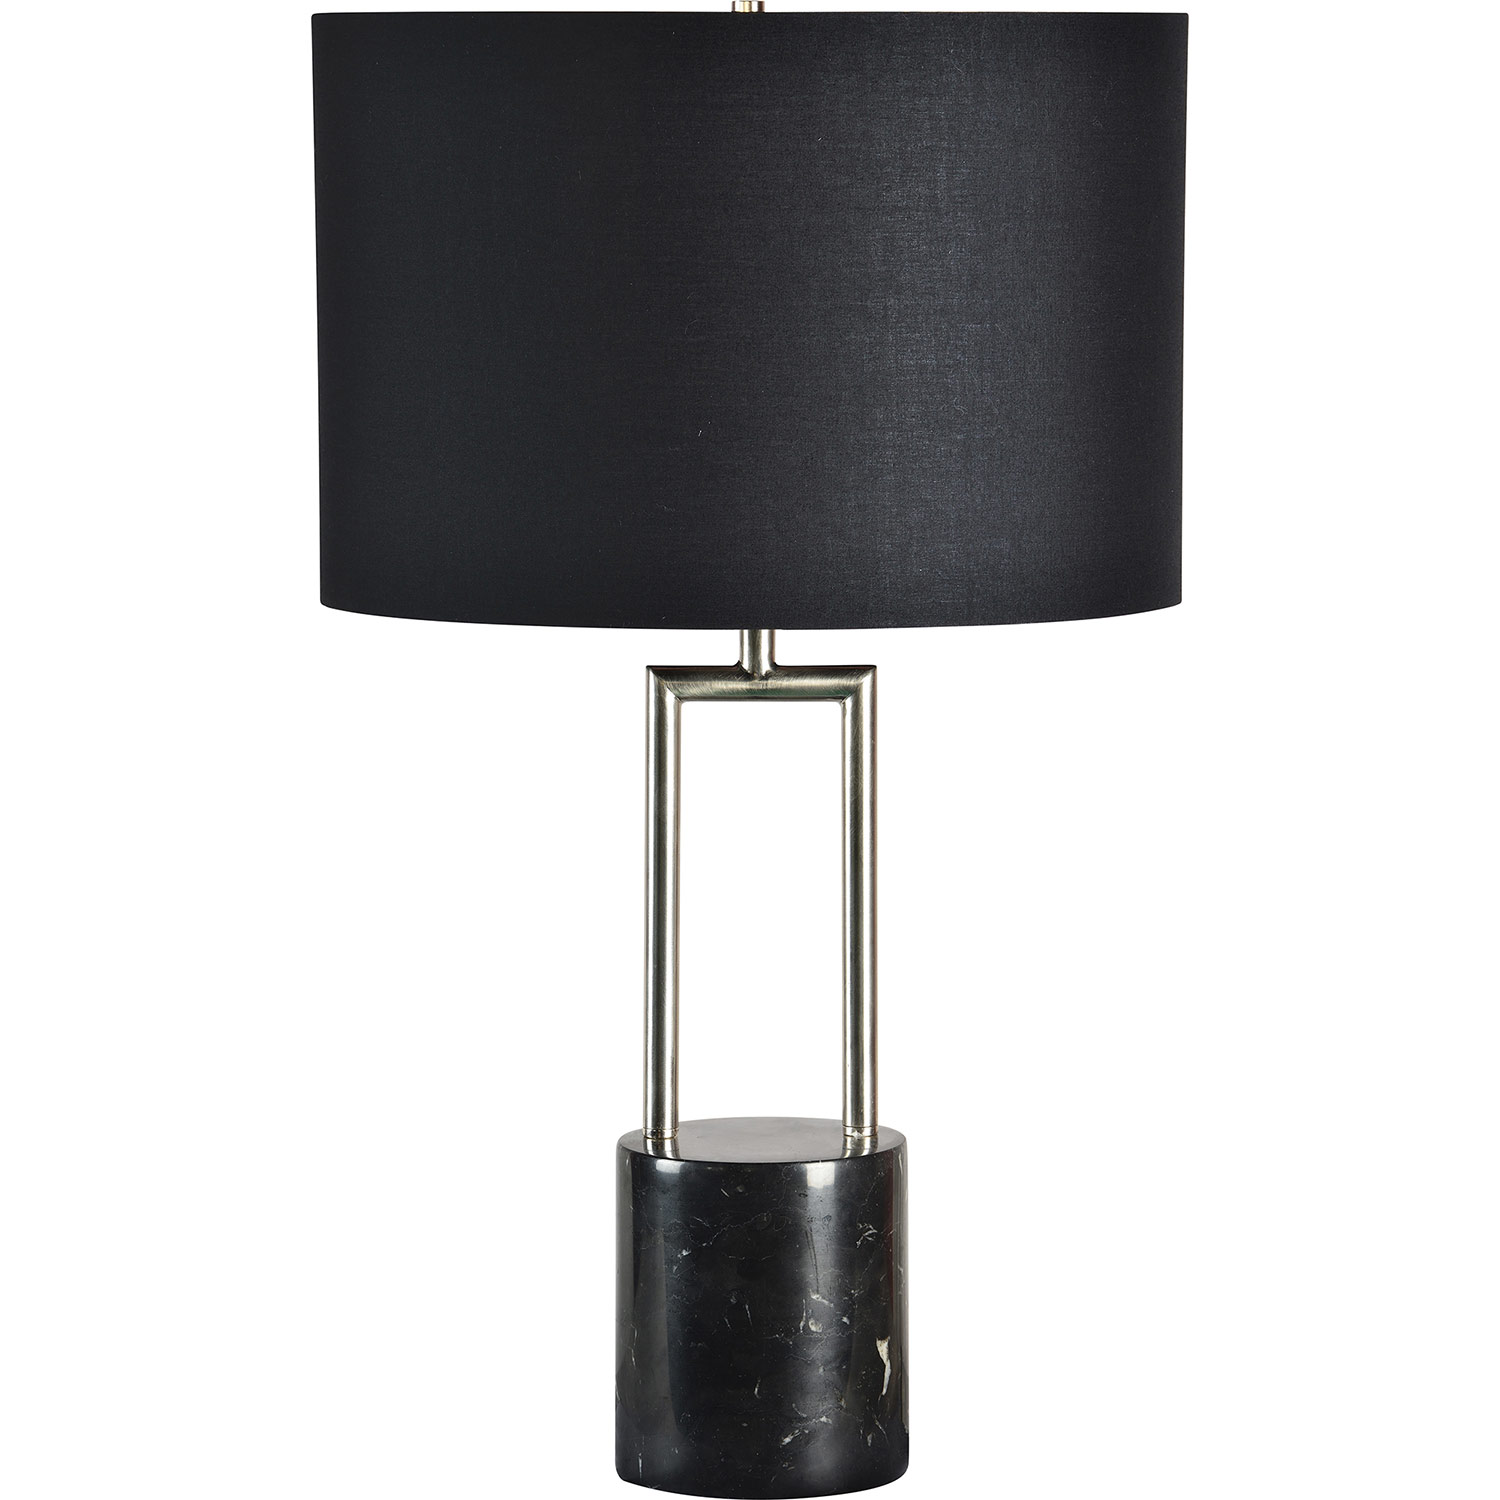 Ren-Wil Chartwell Table Lamp - Black Marble RW-LPT1099 at Homelement.com